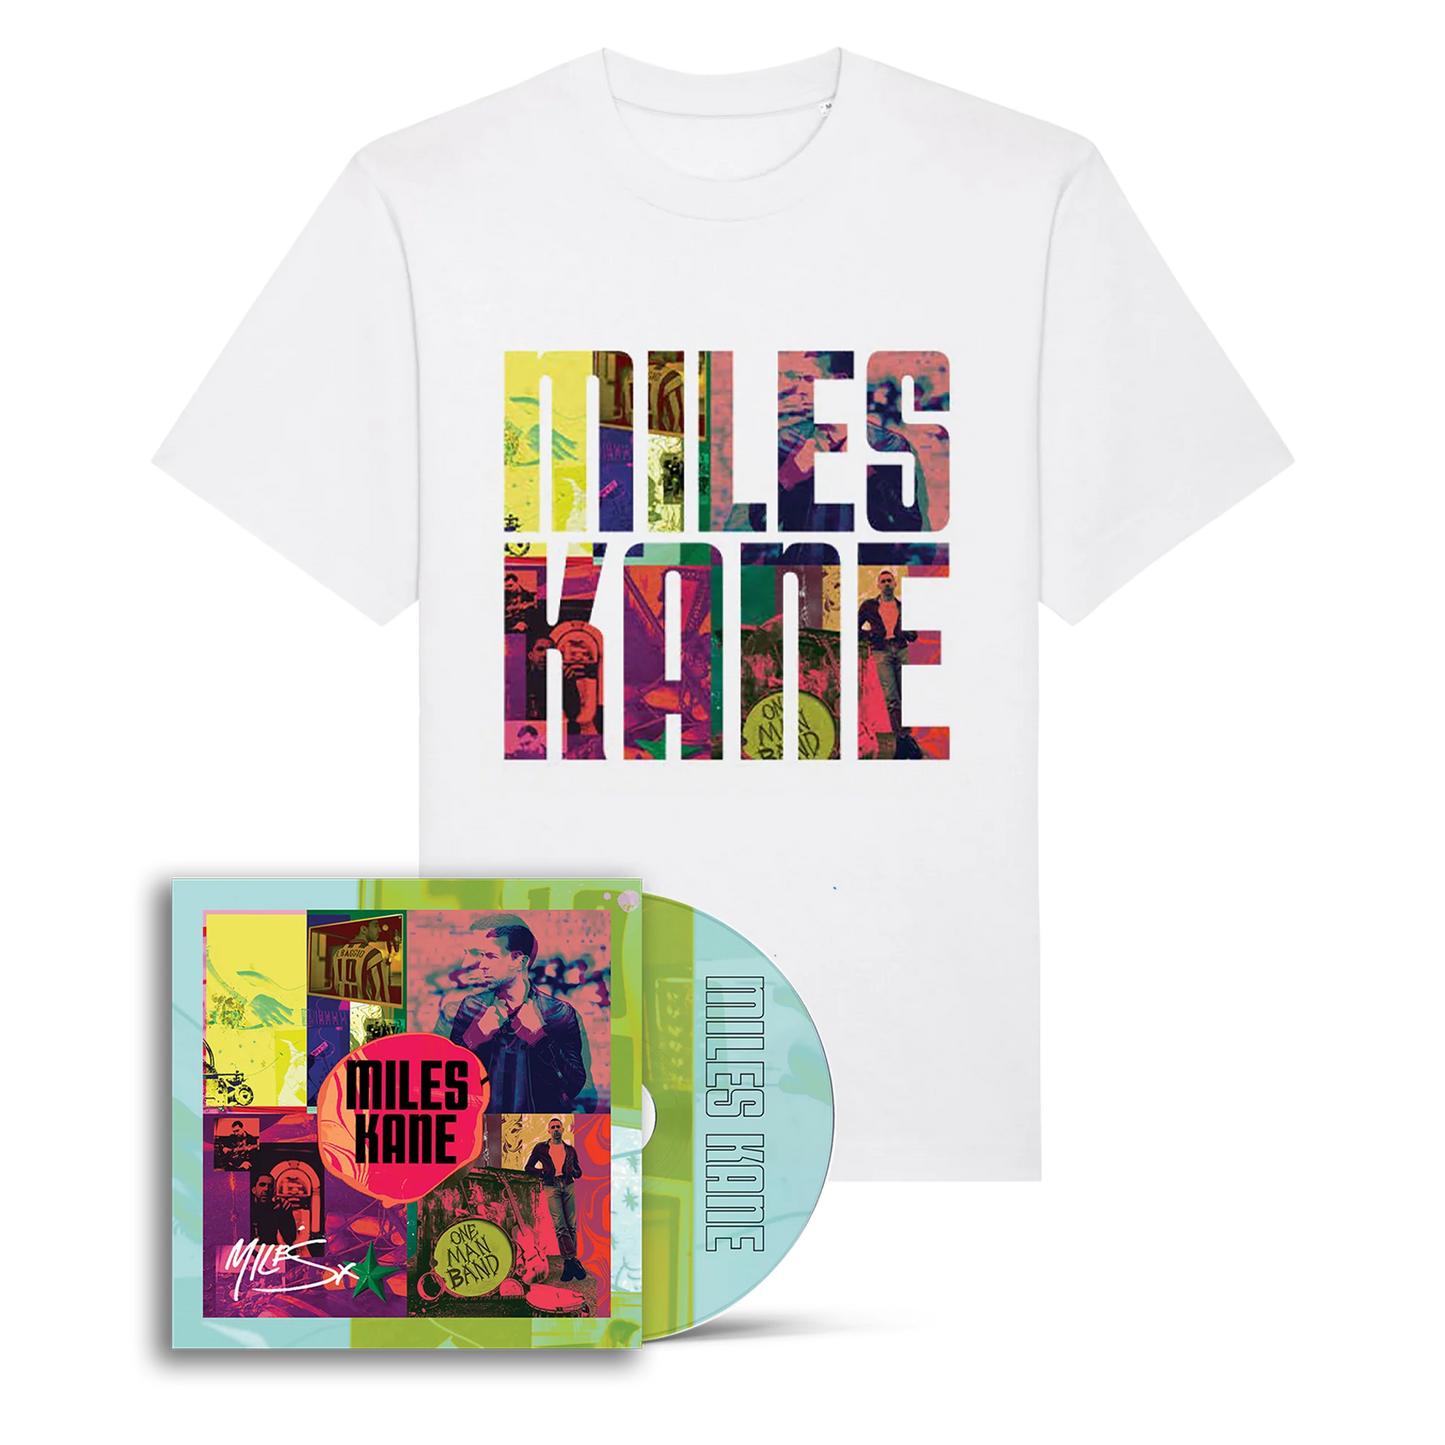 ONE MAN BAND: ALT ART SIGNED CD + WHITE INFILL TEXT TEE